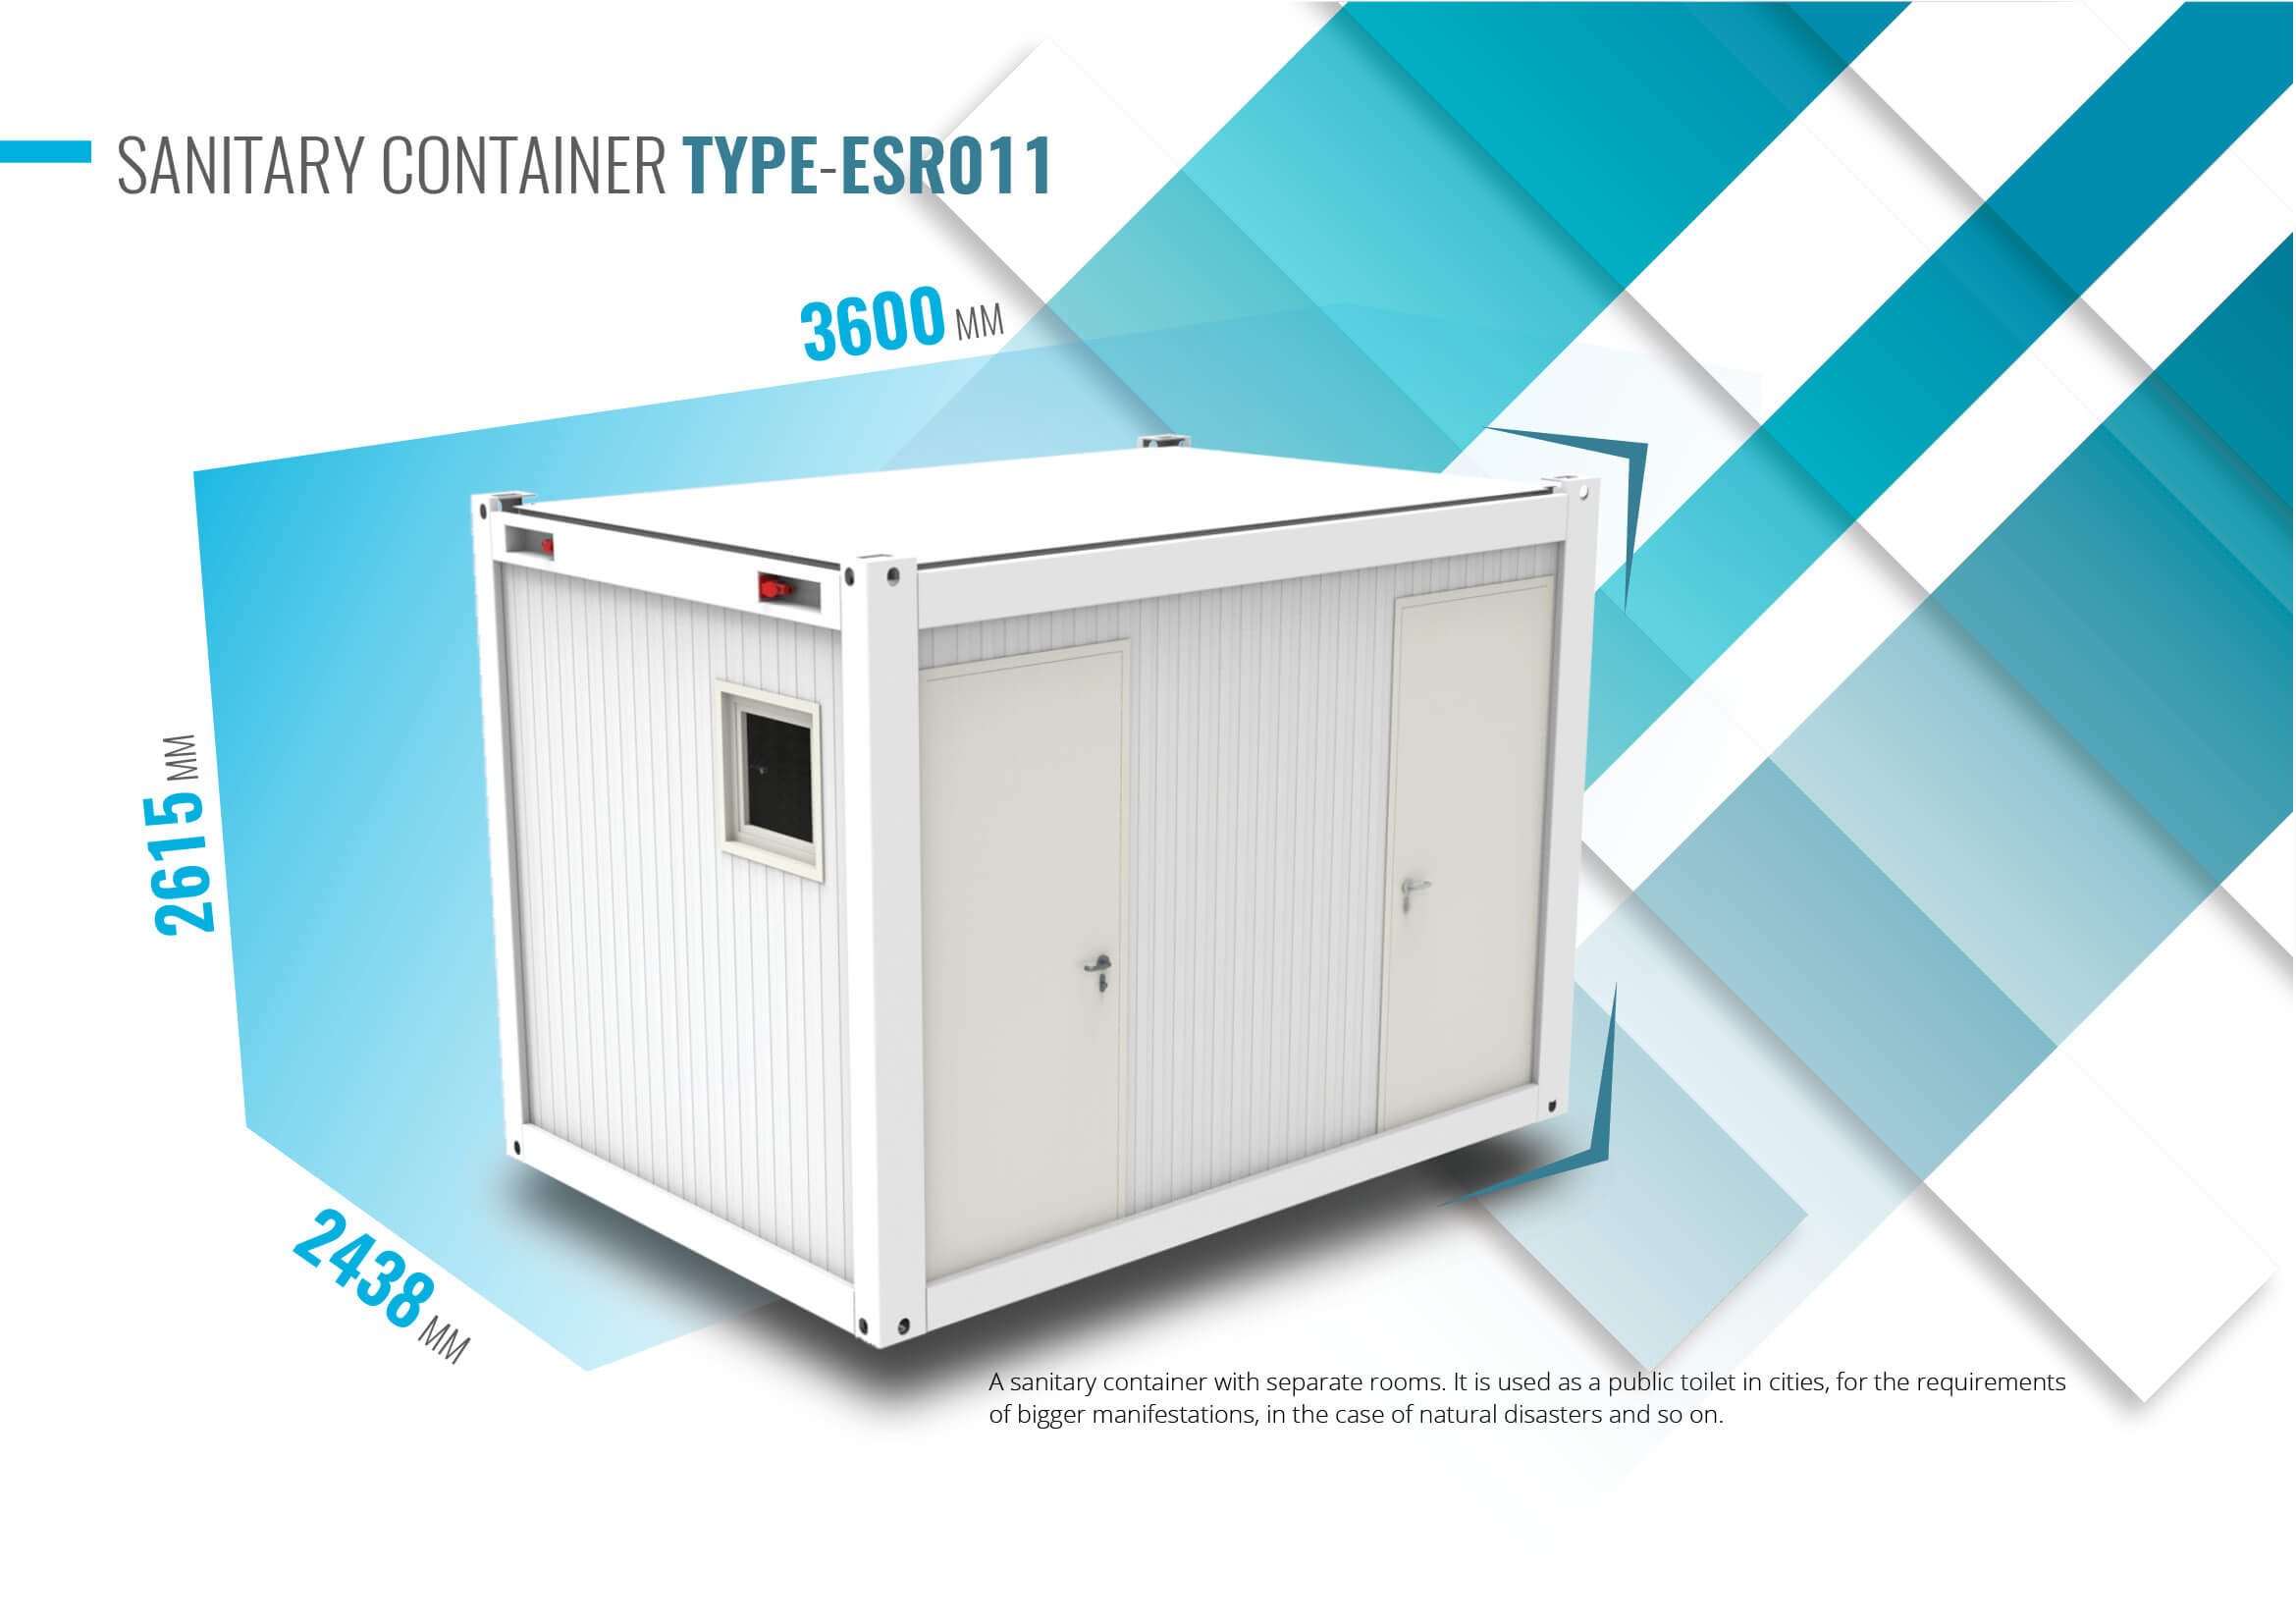 Elvaco MetPro Containers - Modular Systems